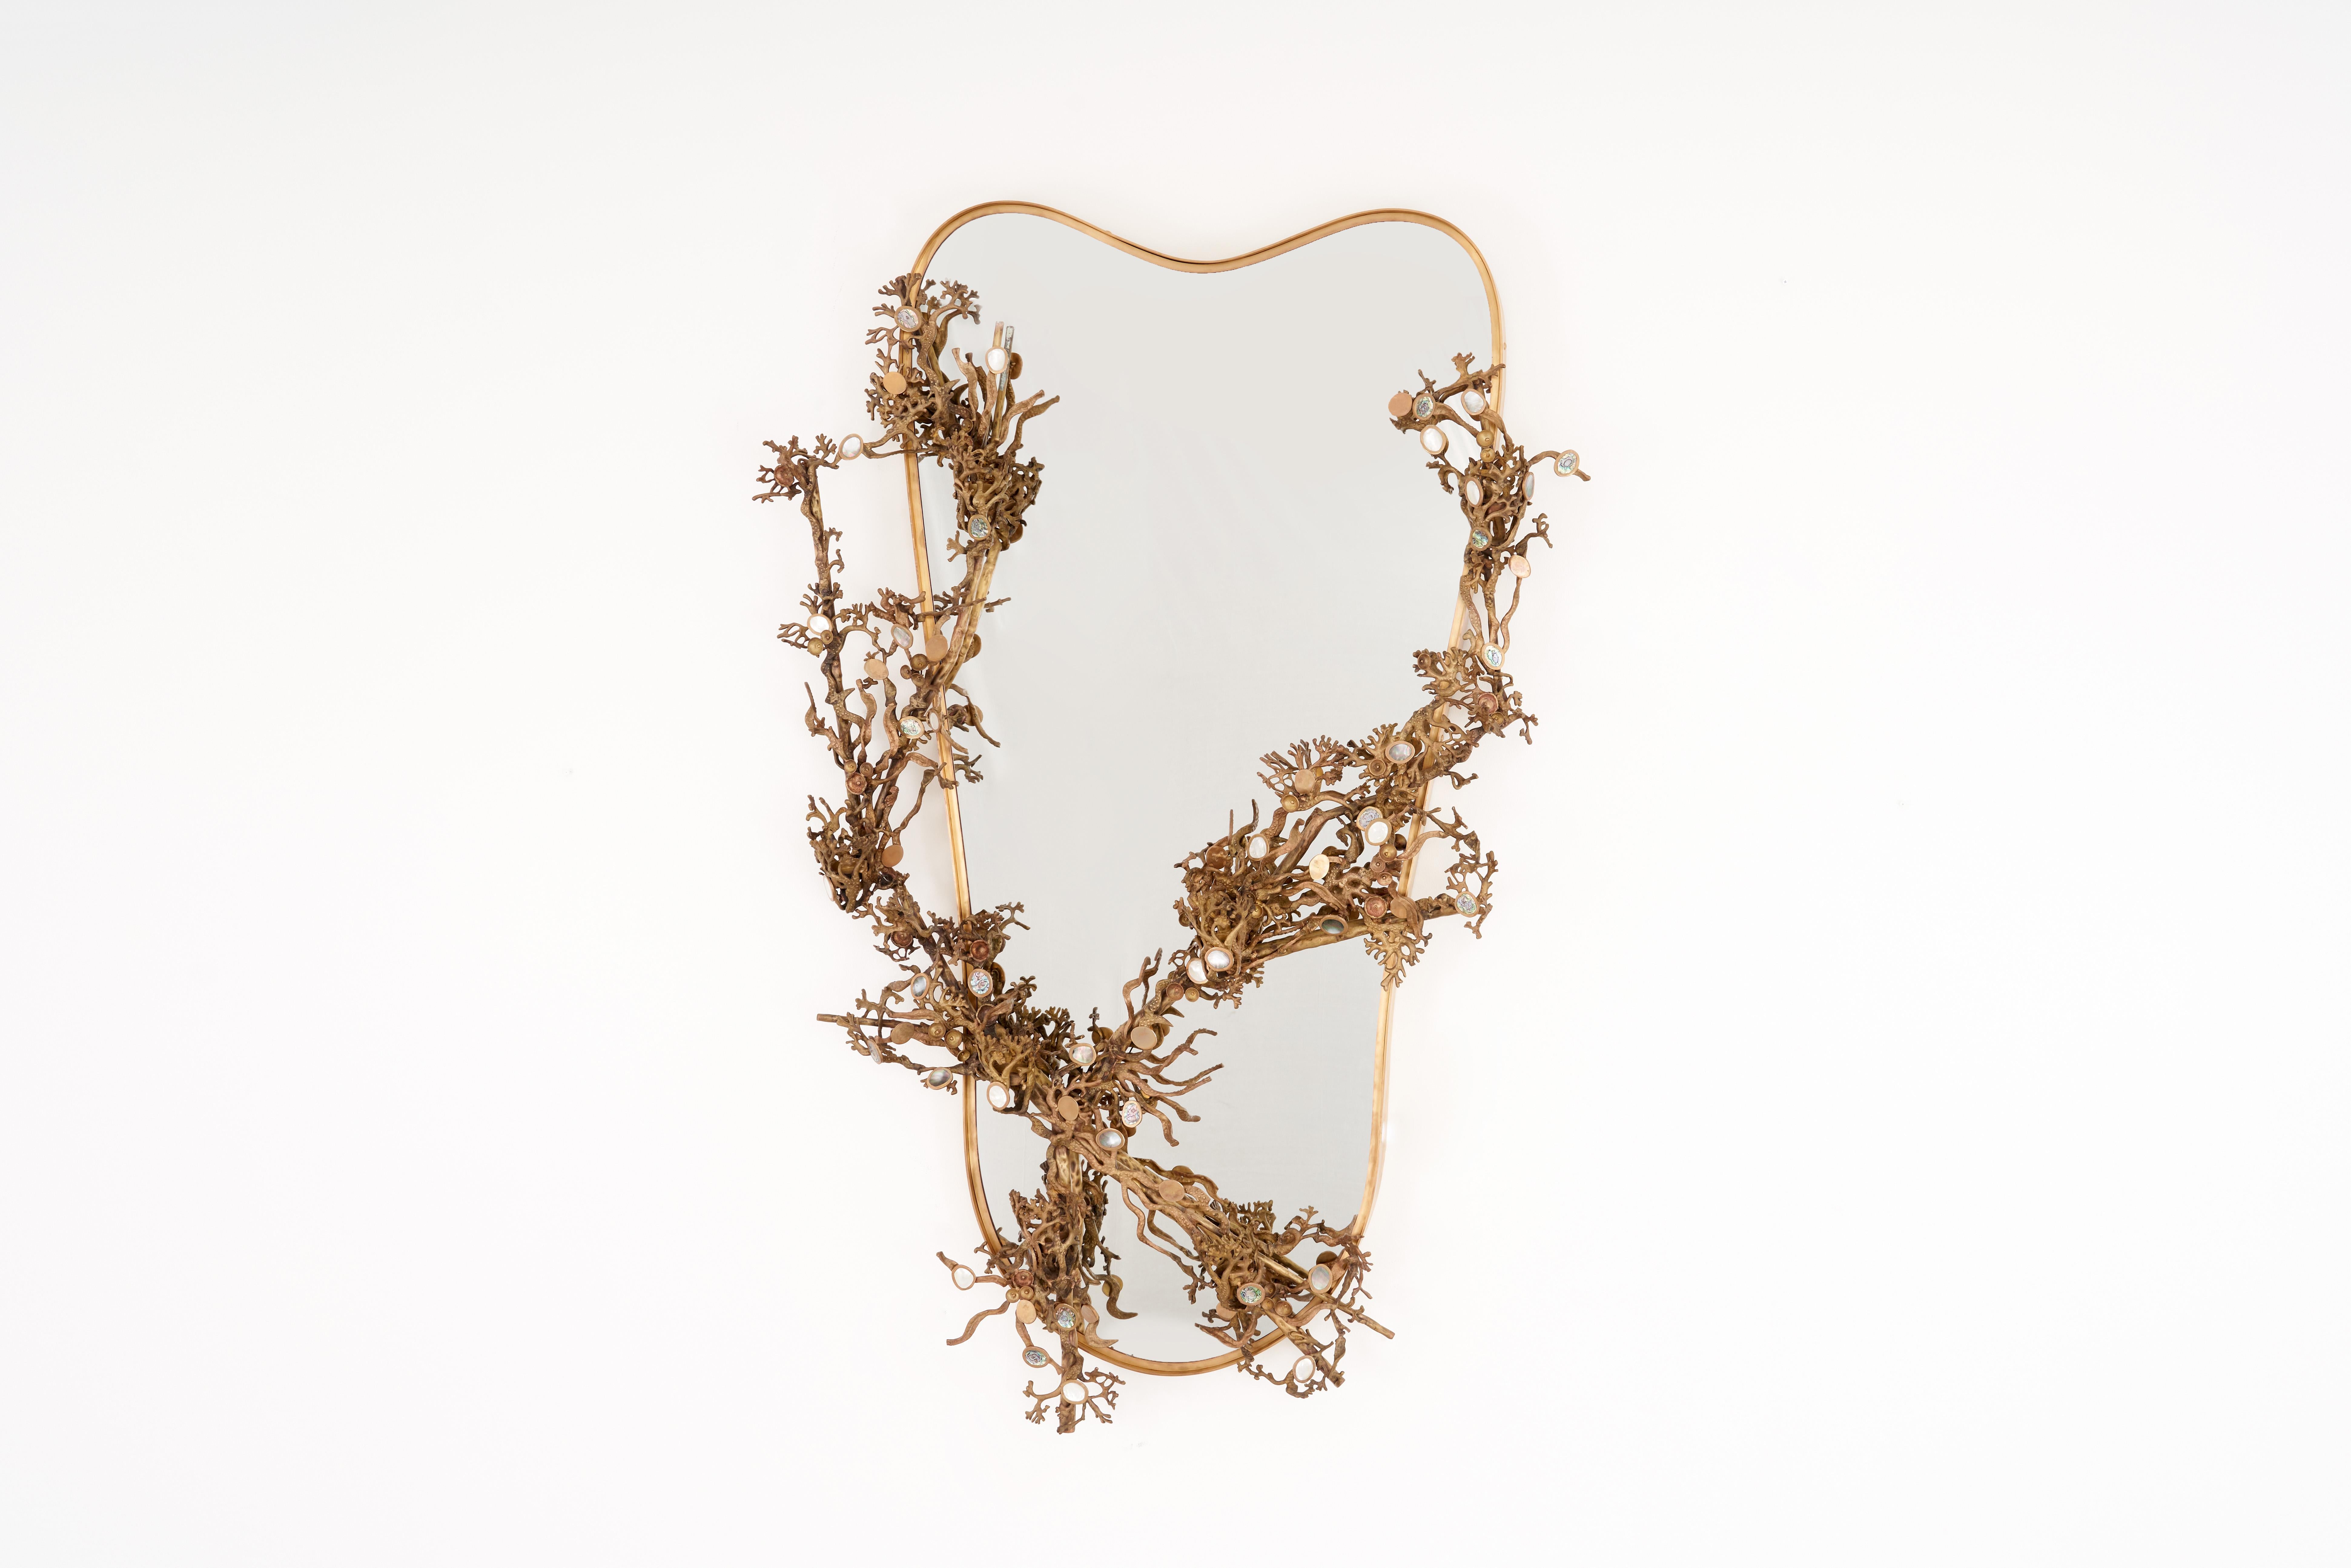 Inspired by the lush, flowering branches of the Japanese Sakura in springtime, this Baroque-style mirror features cast brass branches entwined around its frame. The Cherry Blossoms—which are delicate ornamental flowers—are represented by highlights